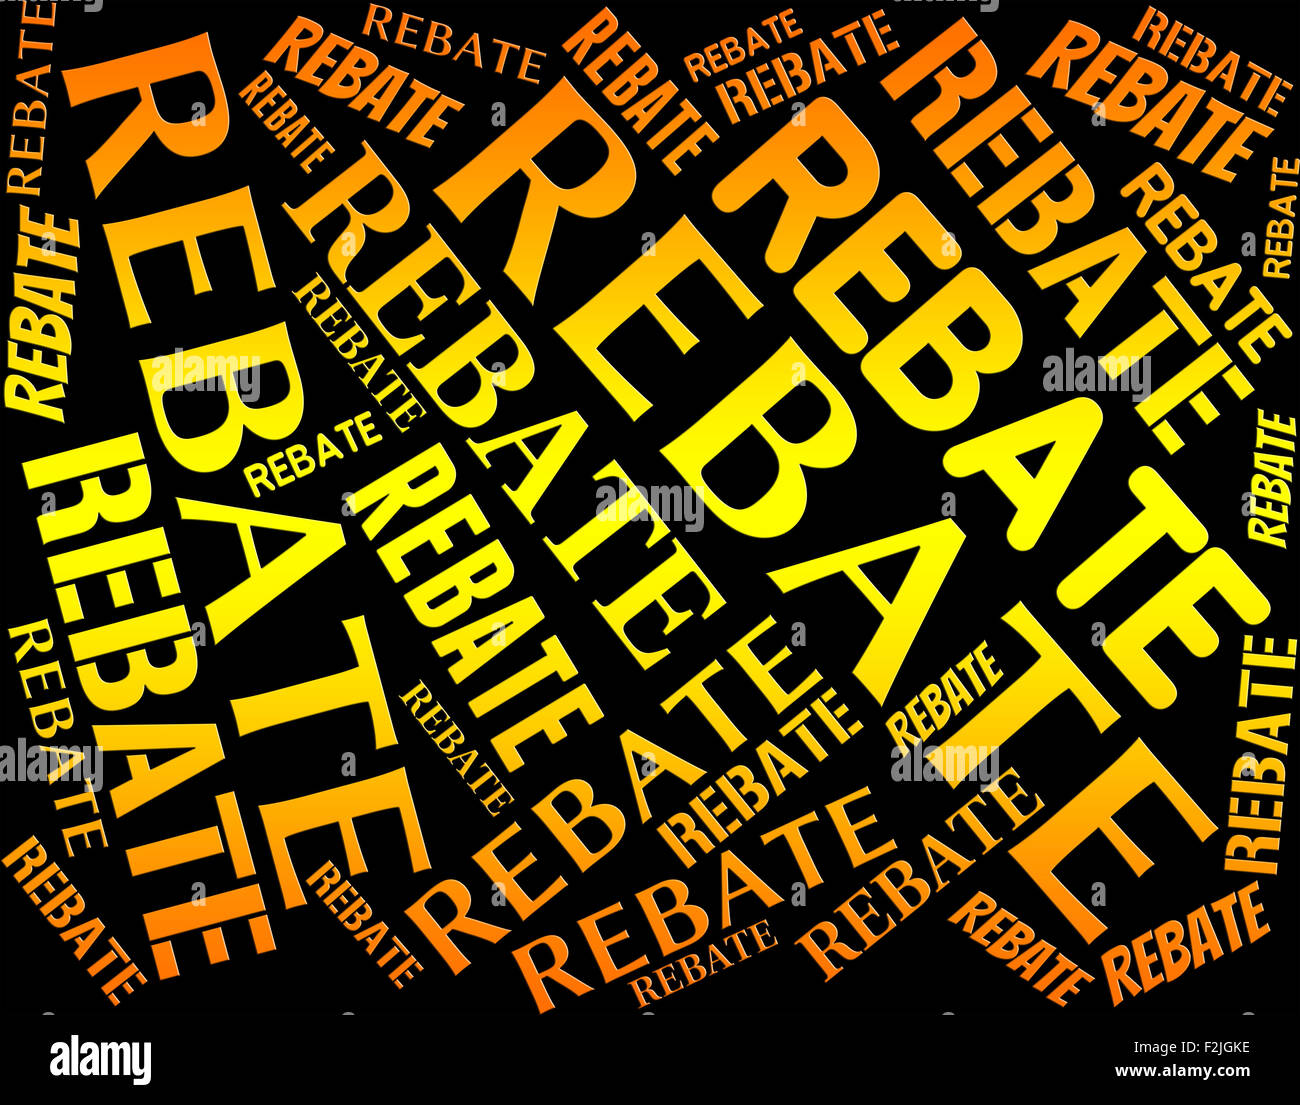 rebate-word-showing-partial-refund-and-text-stock-photo-alamy